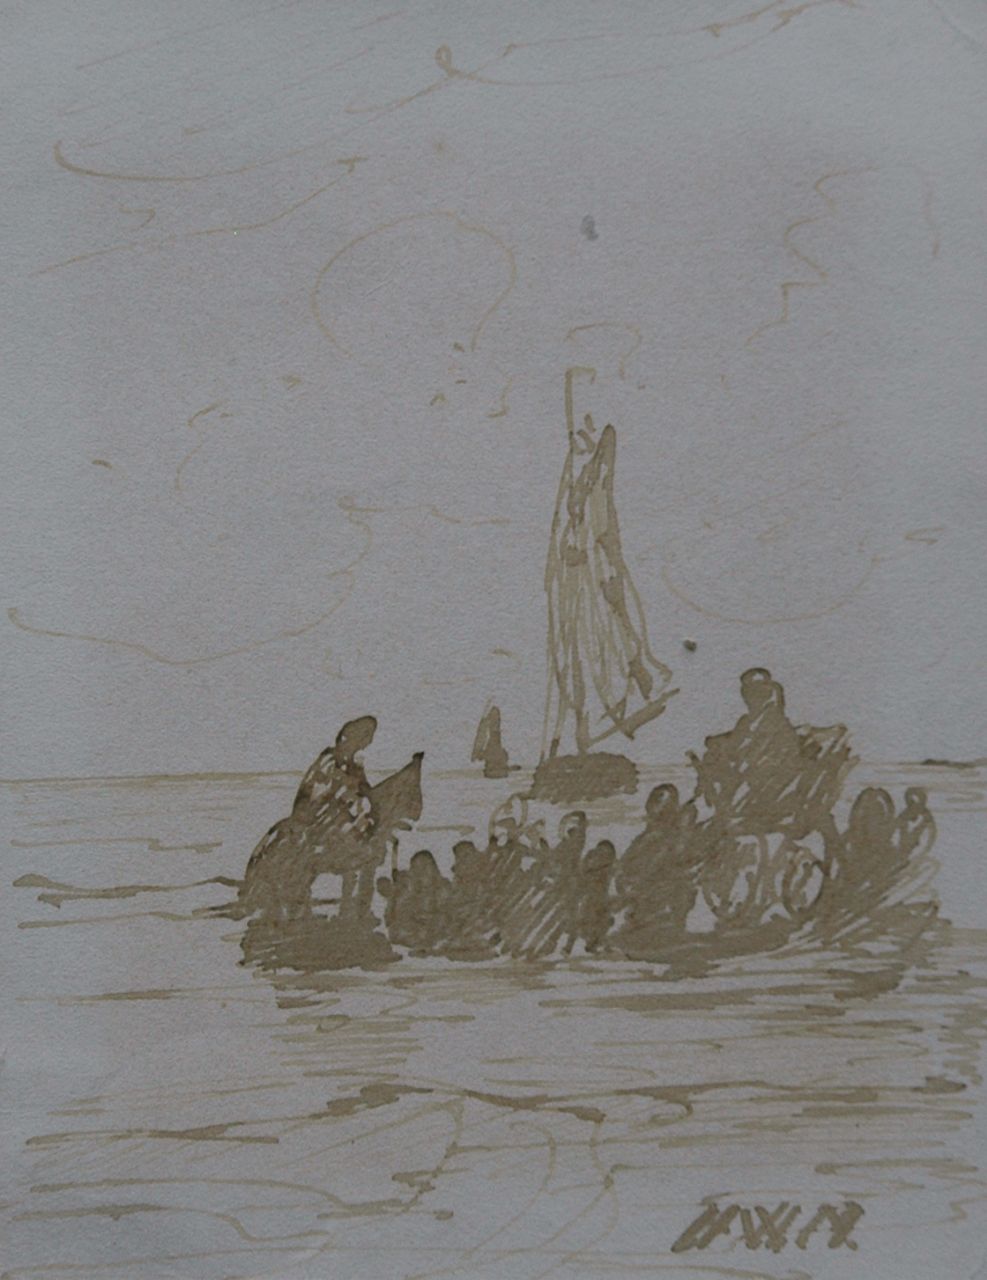 Mesdag H.W.  | Hendrik Willem Mesdag, Awaiting the fleet, pen in brown ink on paper 11.2 x 8.7 cm, signed l.r. with initials